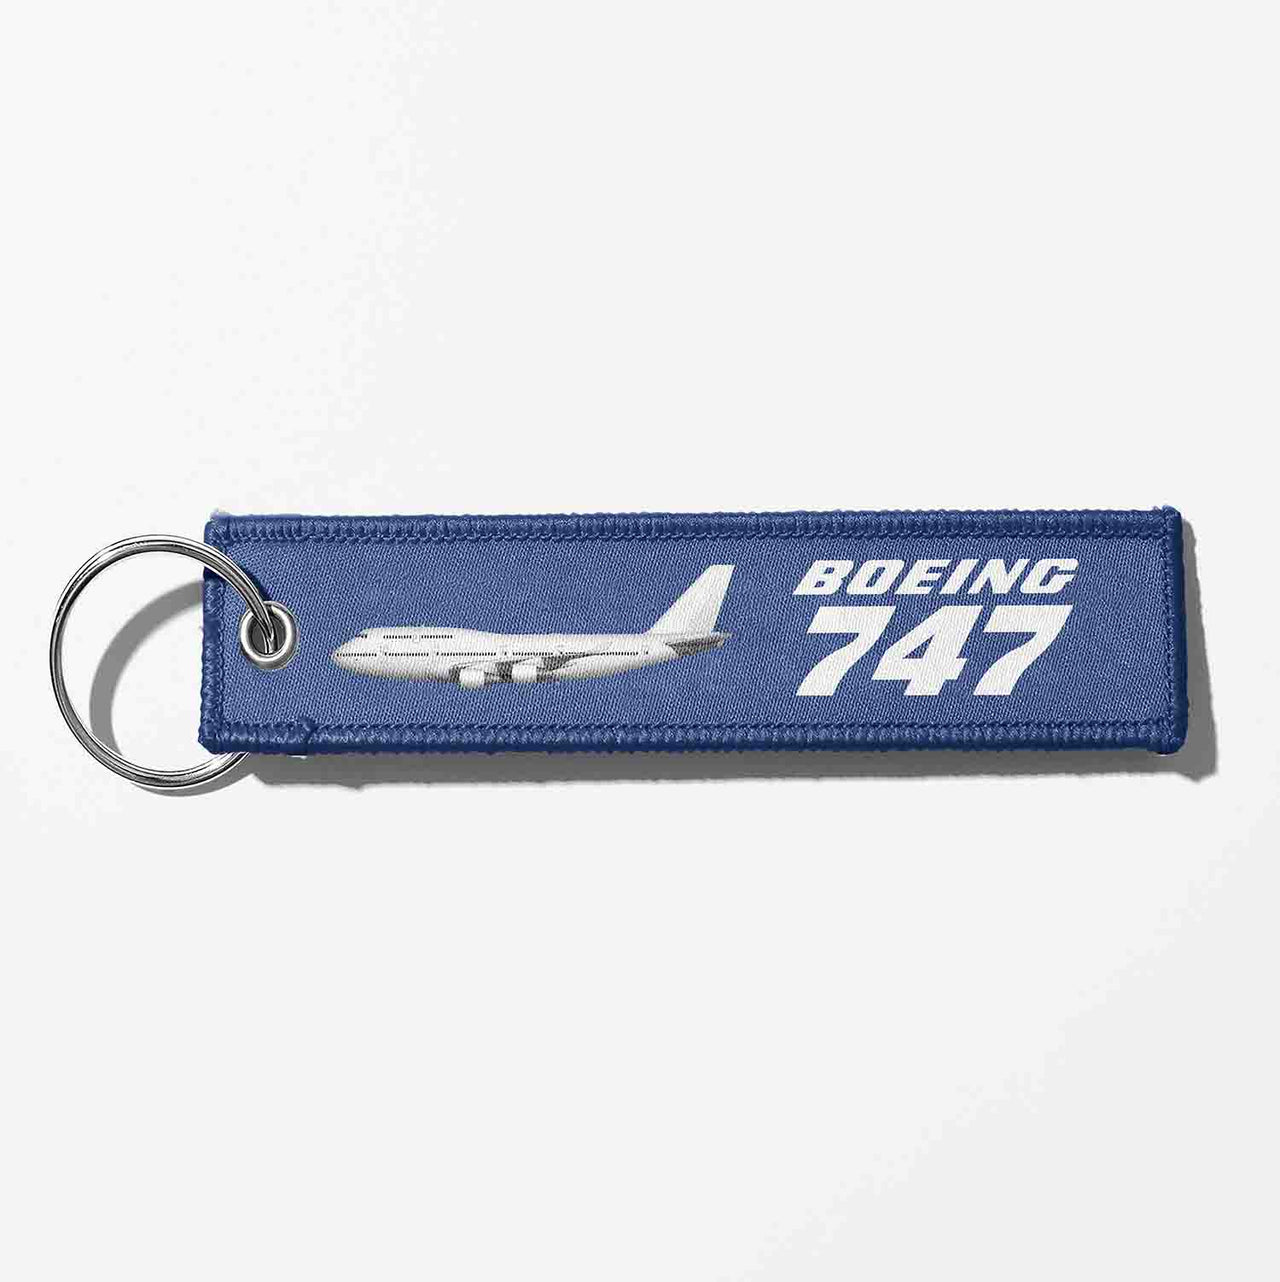 The Boeing 747 Designed Key Chains